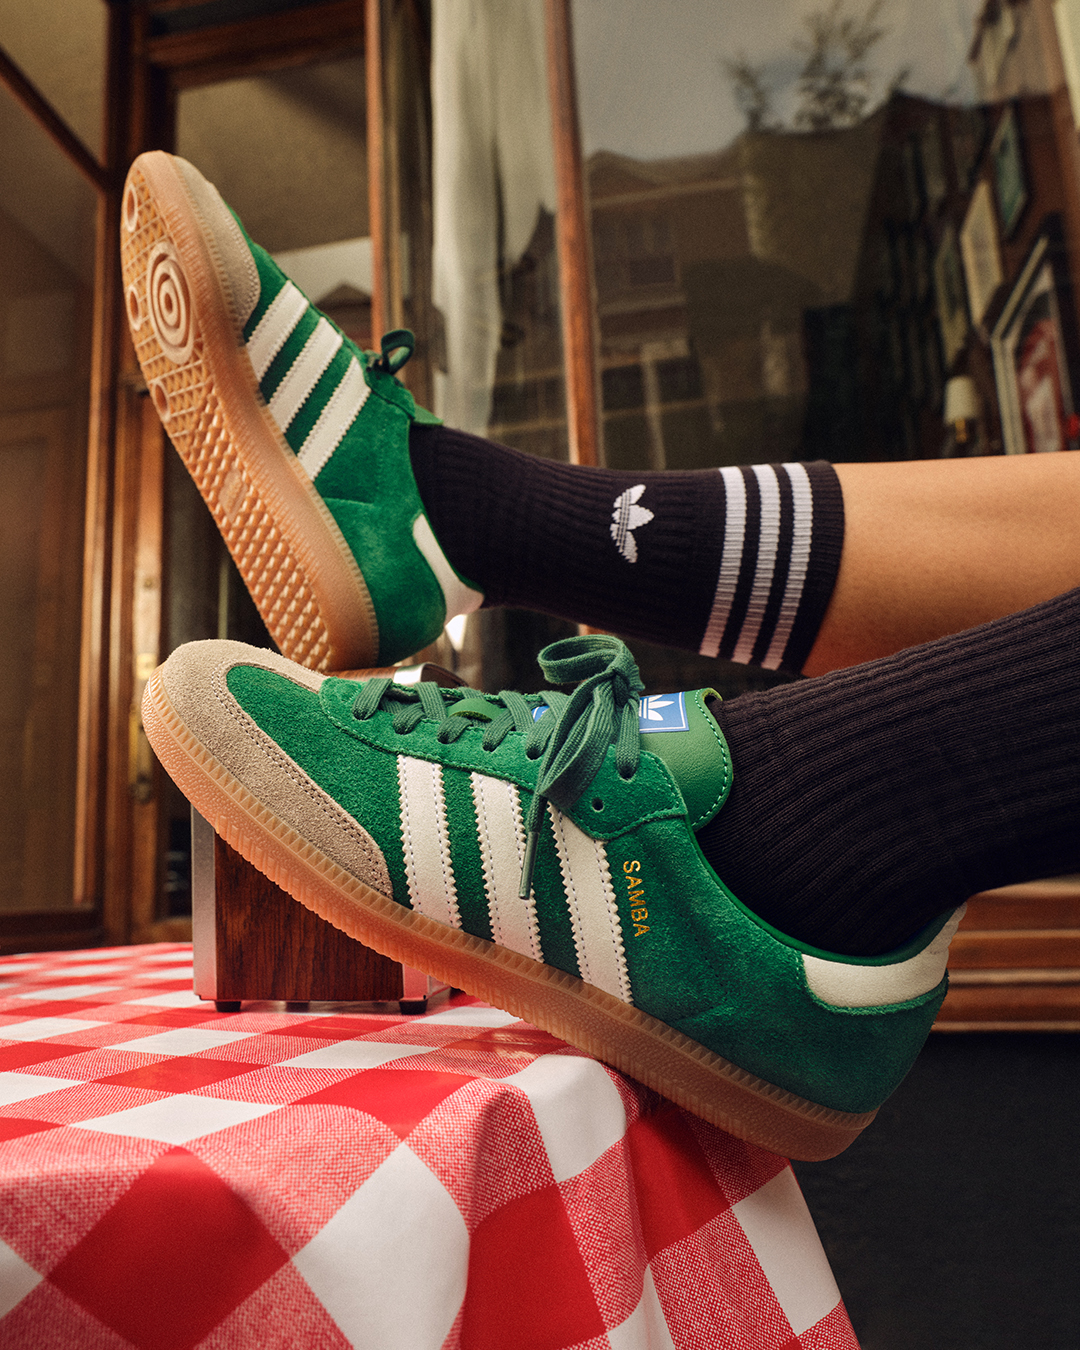 Adidas Sambas, the It-Girls' Current Favorite Sneakers, Have